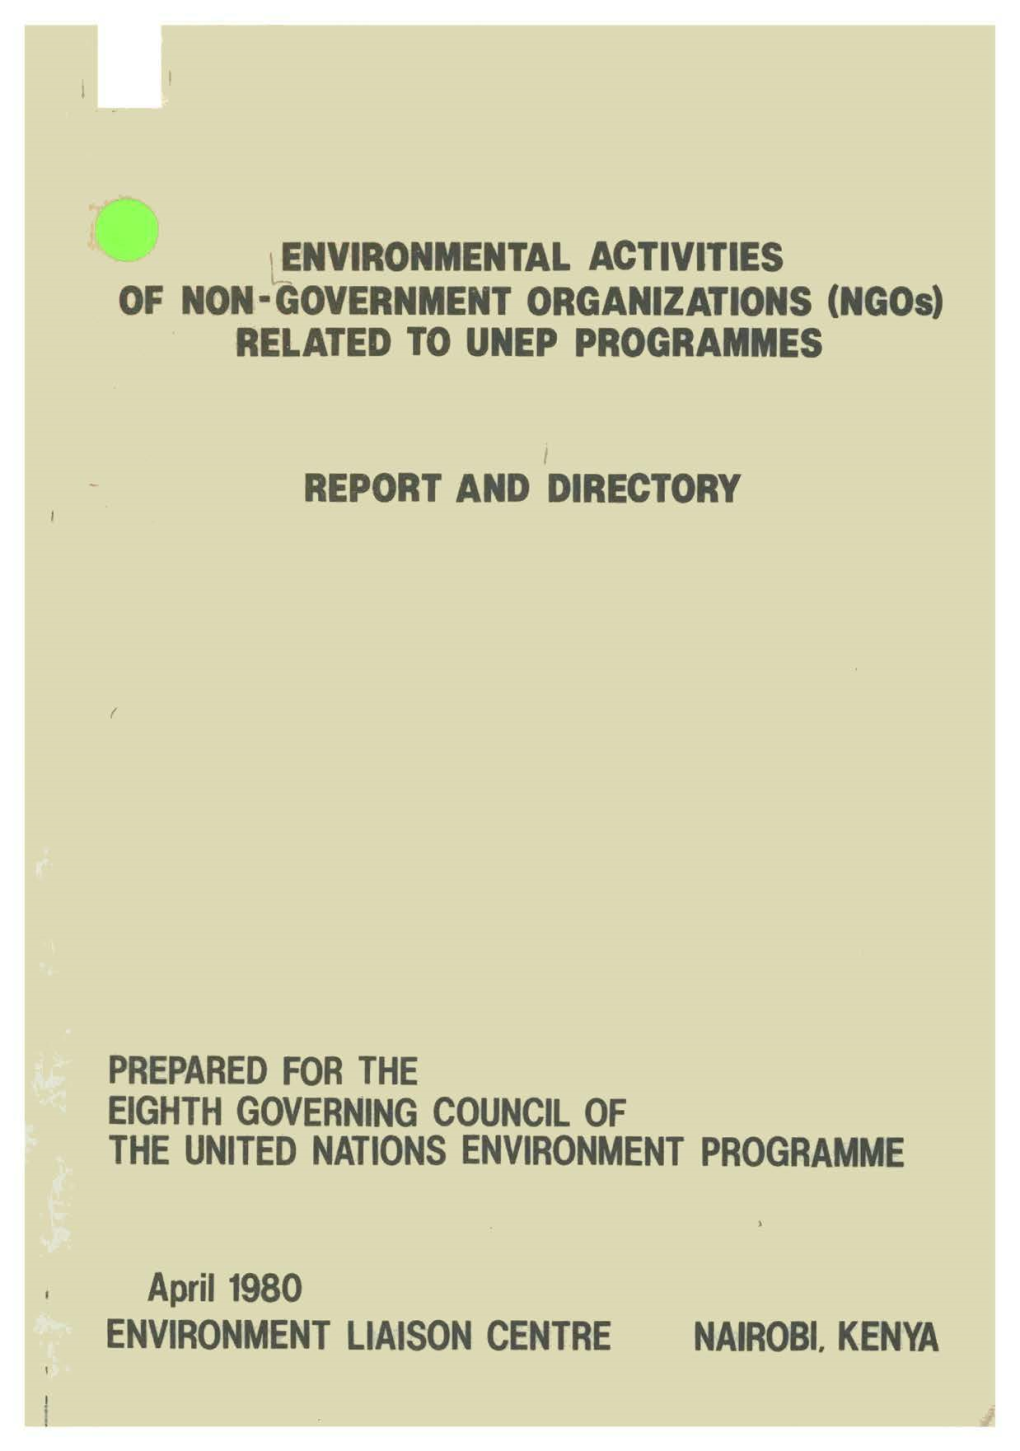 Ngos) RELATED to UNEP PROGRAMMES